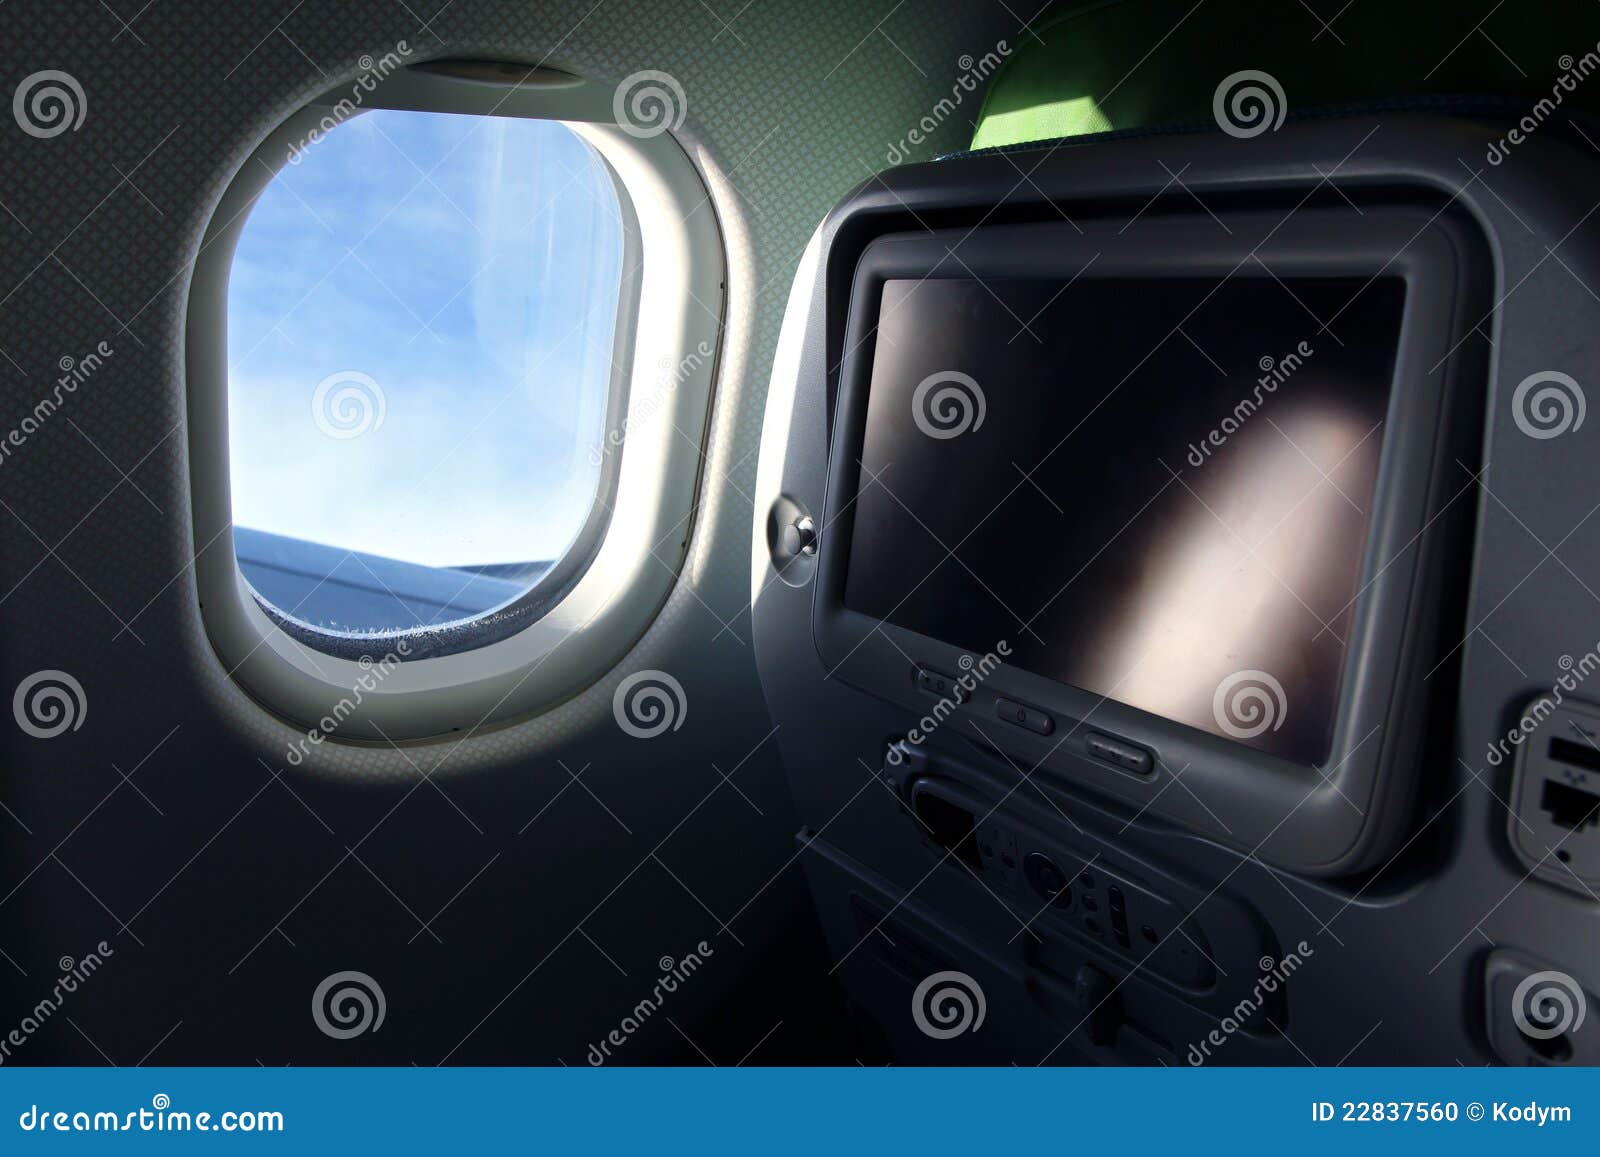 airplane seat with tv screen